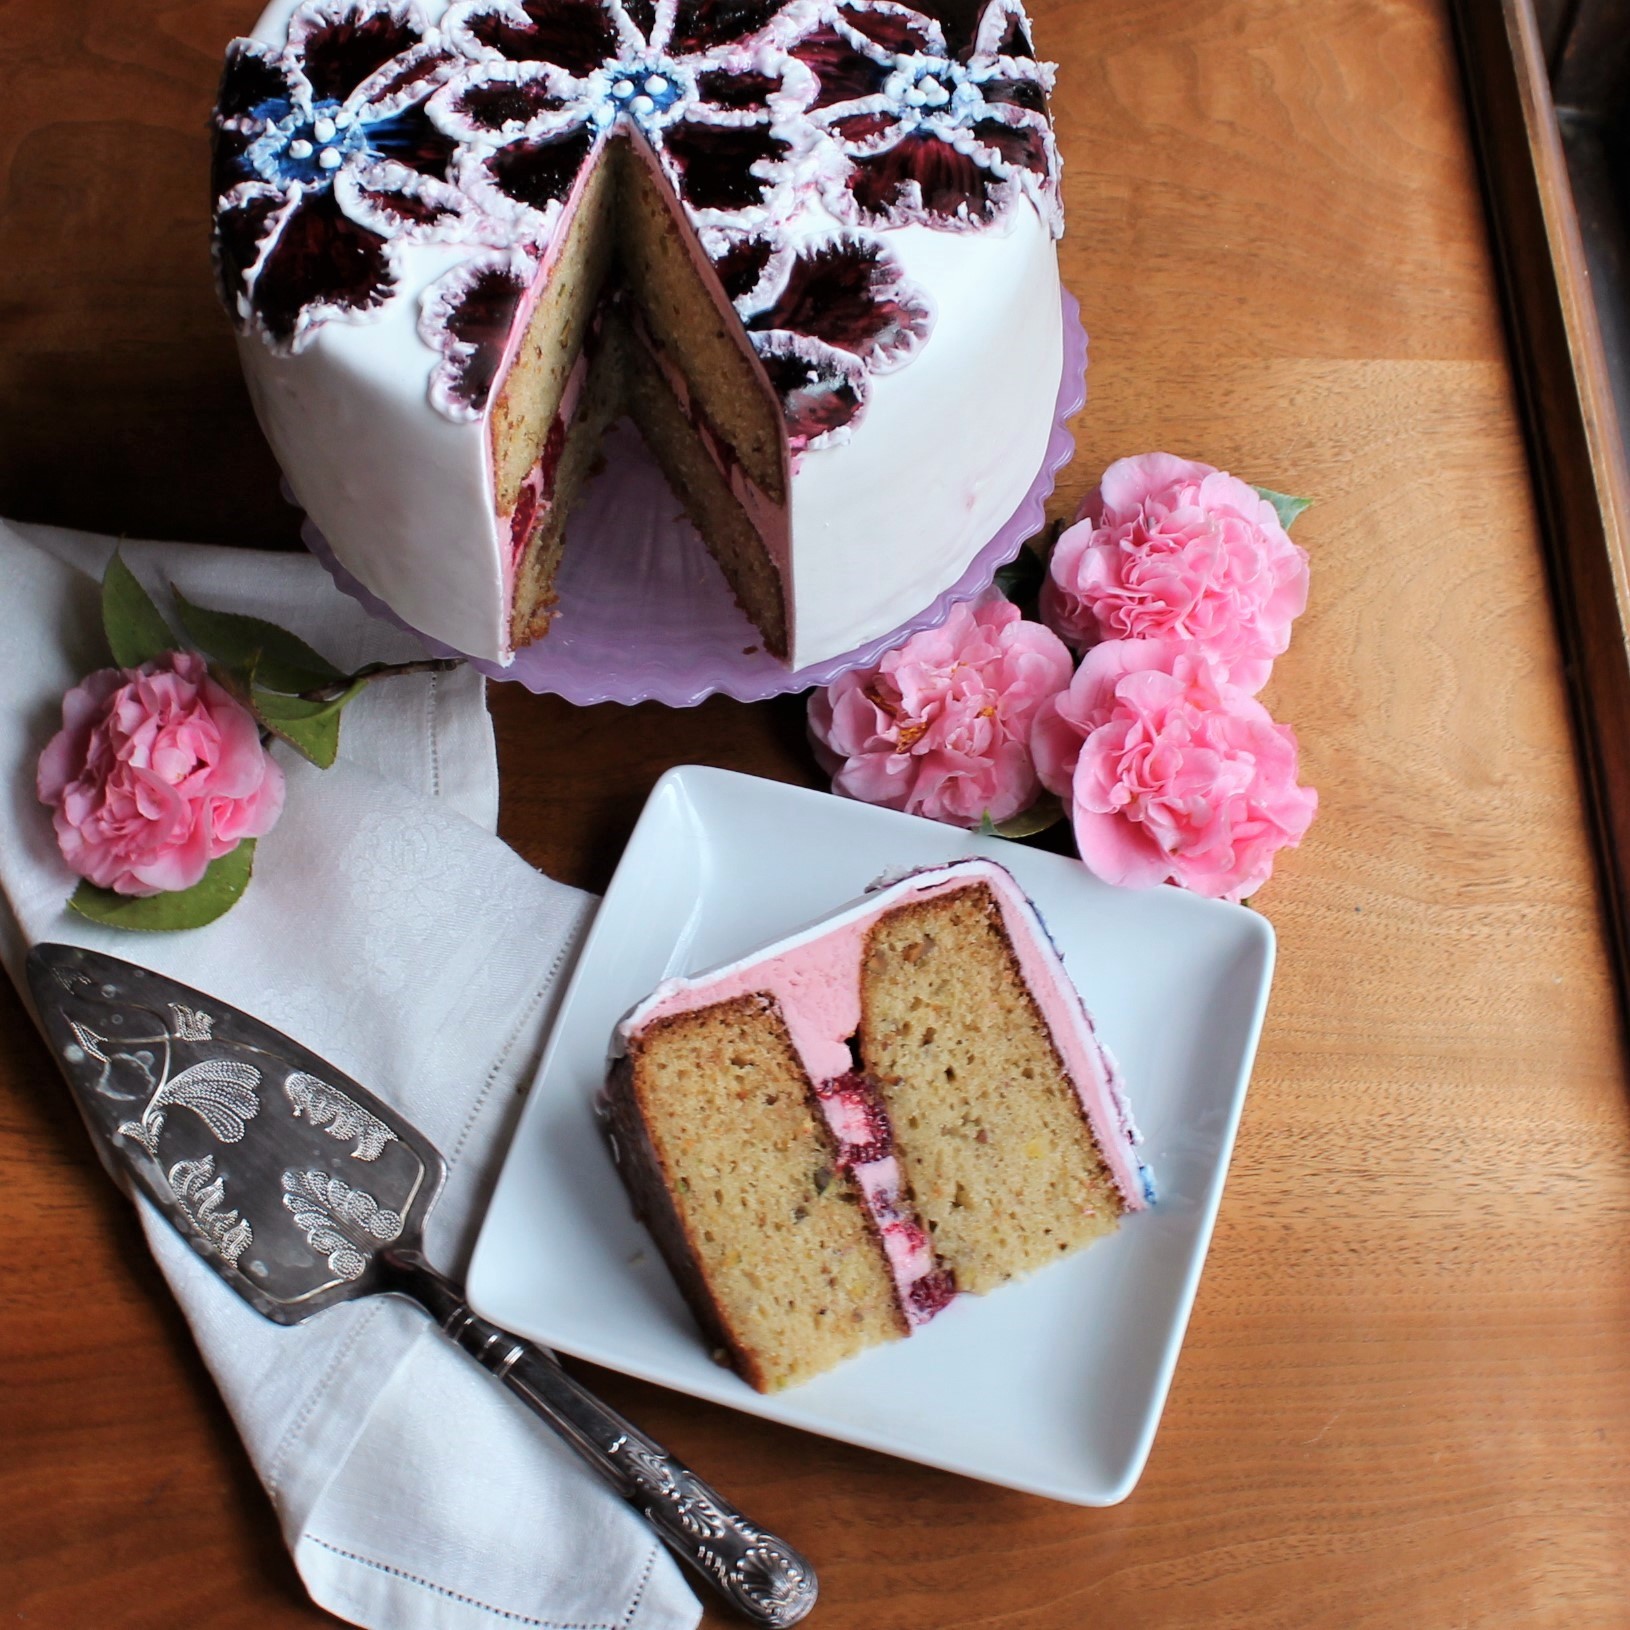 A pistachio cake with raspberry rose frosting on a pink cake stand with a slice on a white plate